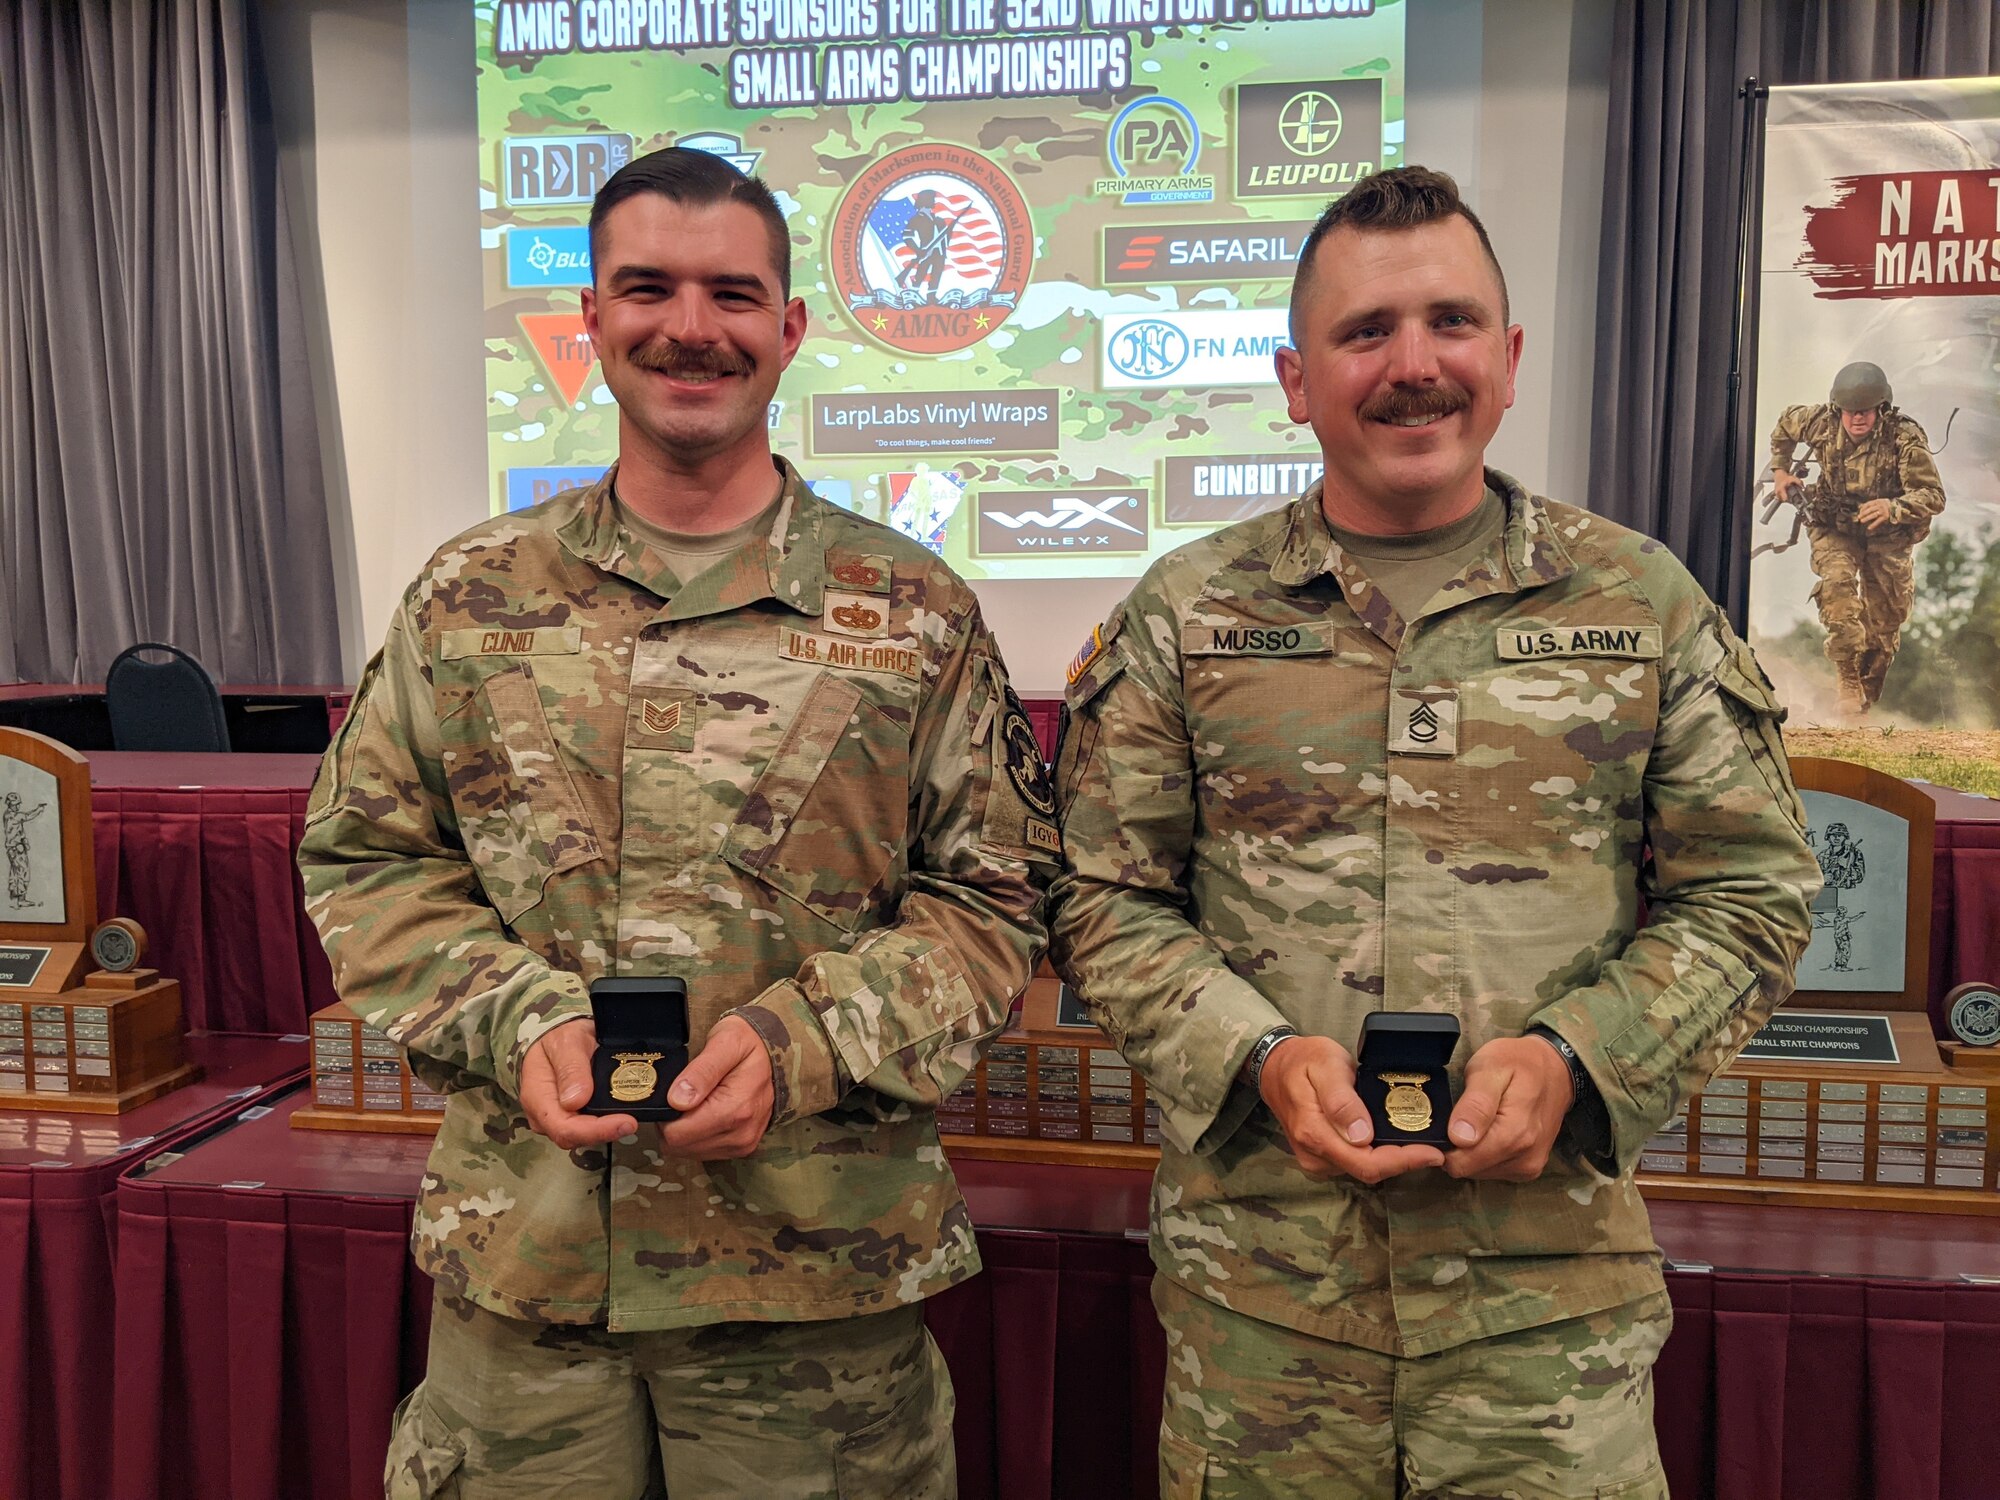 Two NHNG shooters, Tech. Sgt. Connor Cunio of the 157th Air Refueling Wing and Sgt. 1st Class David Musso of 3643d Brigade Support Battalion show off their “Chief’s 50” badges May 5, 2023, at the 52nd Annual Winston P. Wilson Rifle and Pistol Championships awards ceremony in North Little Rock, Arkansas.